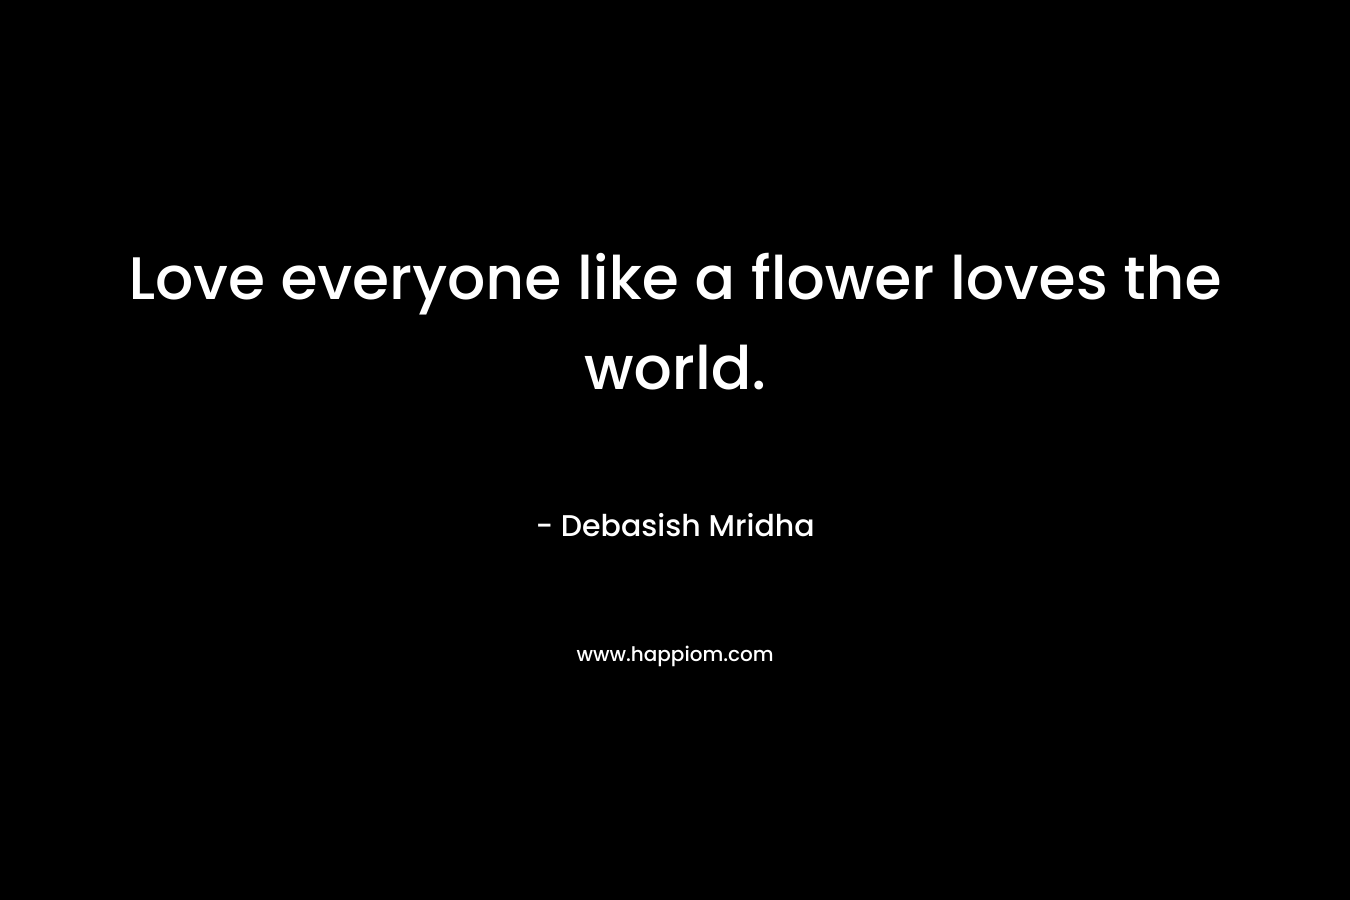 Love everyone like a flower loves the world.